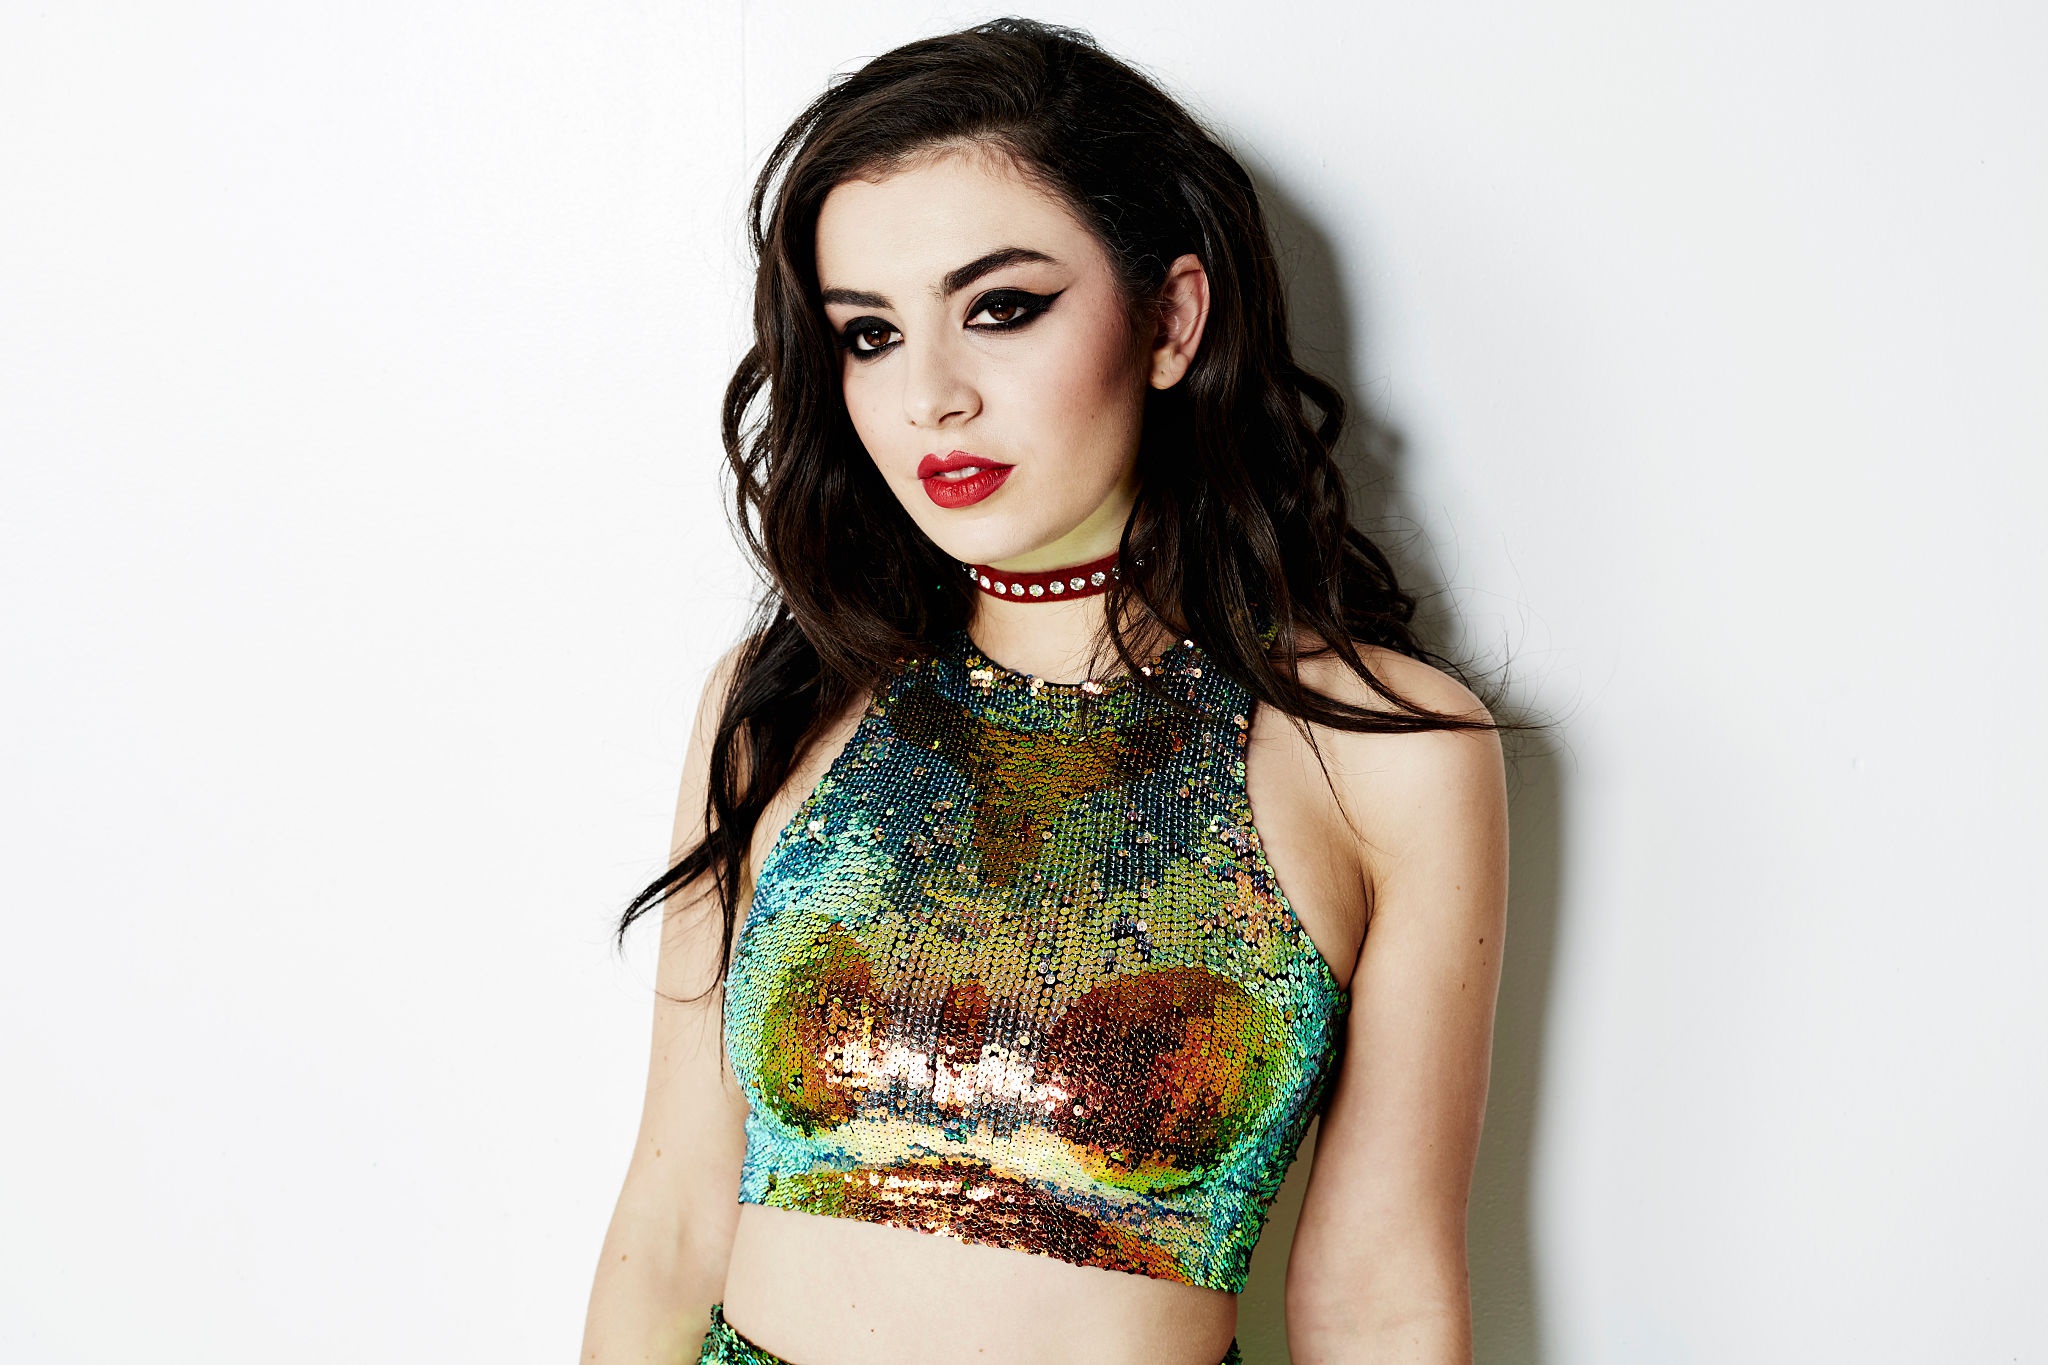 Black-haired Charli Xcx in a short sequined top